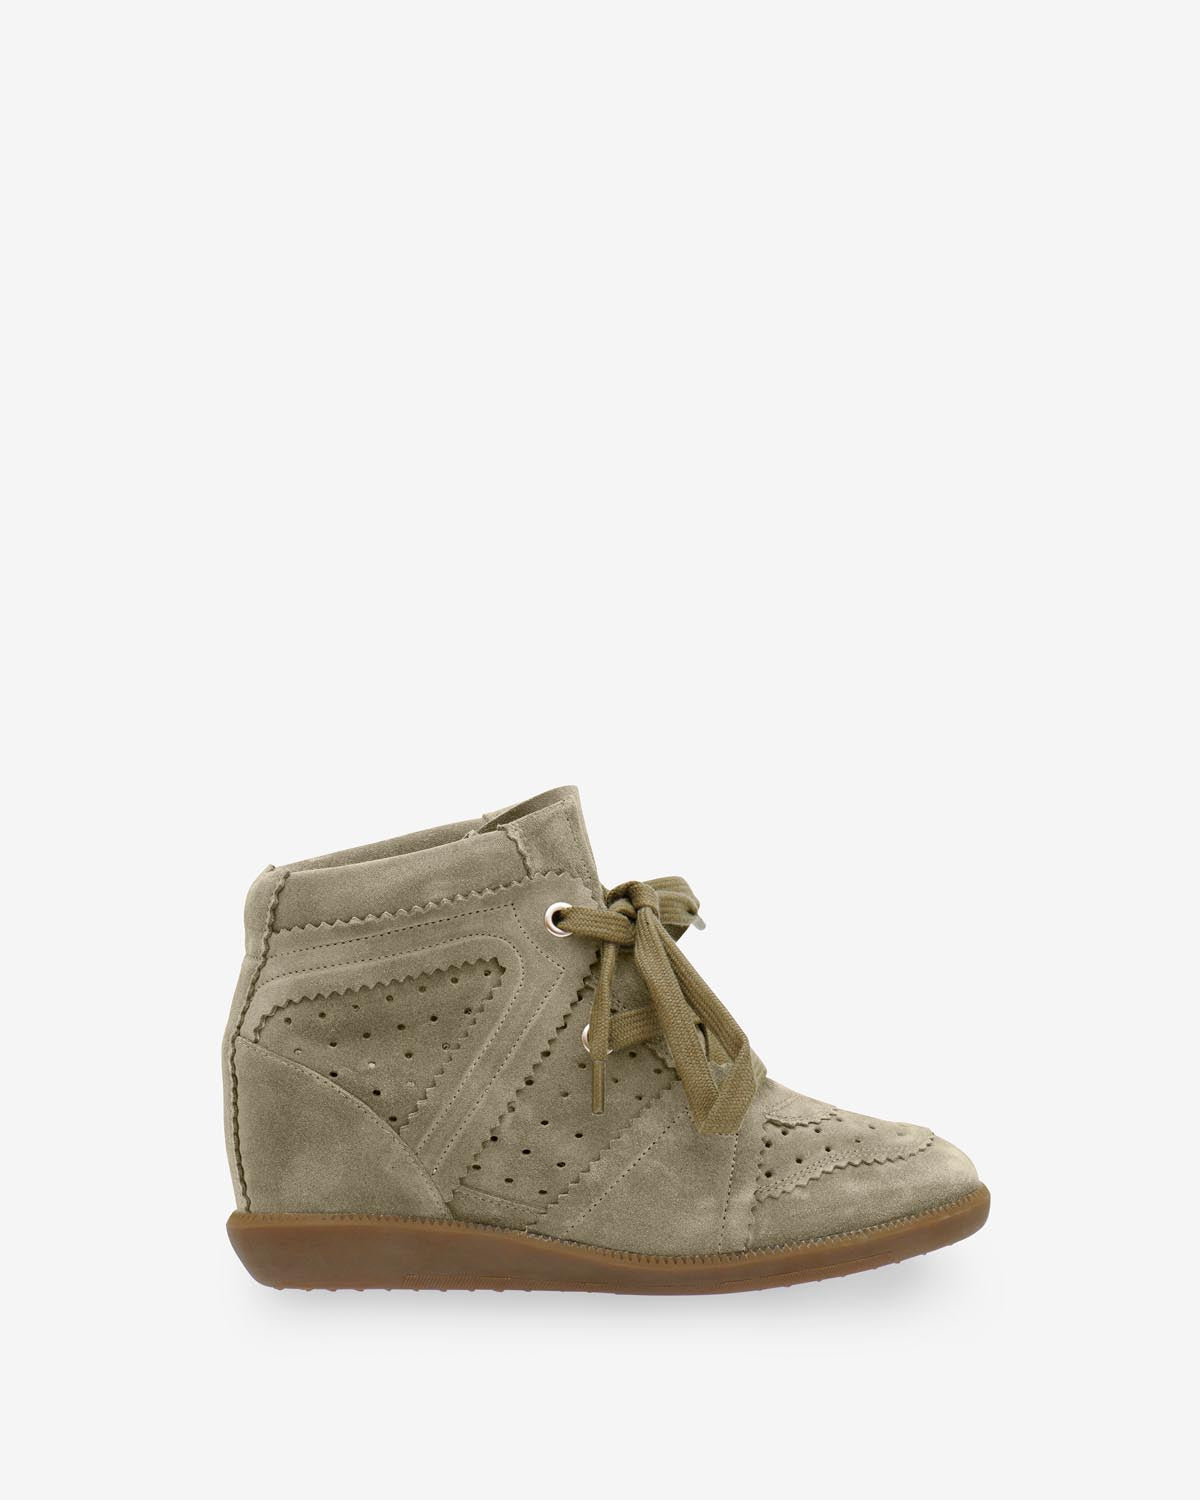 Bobby sneakers Woman Taupe 5